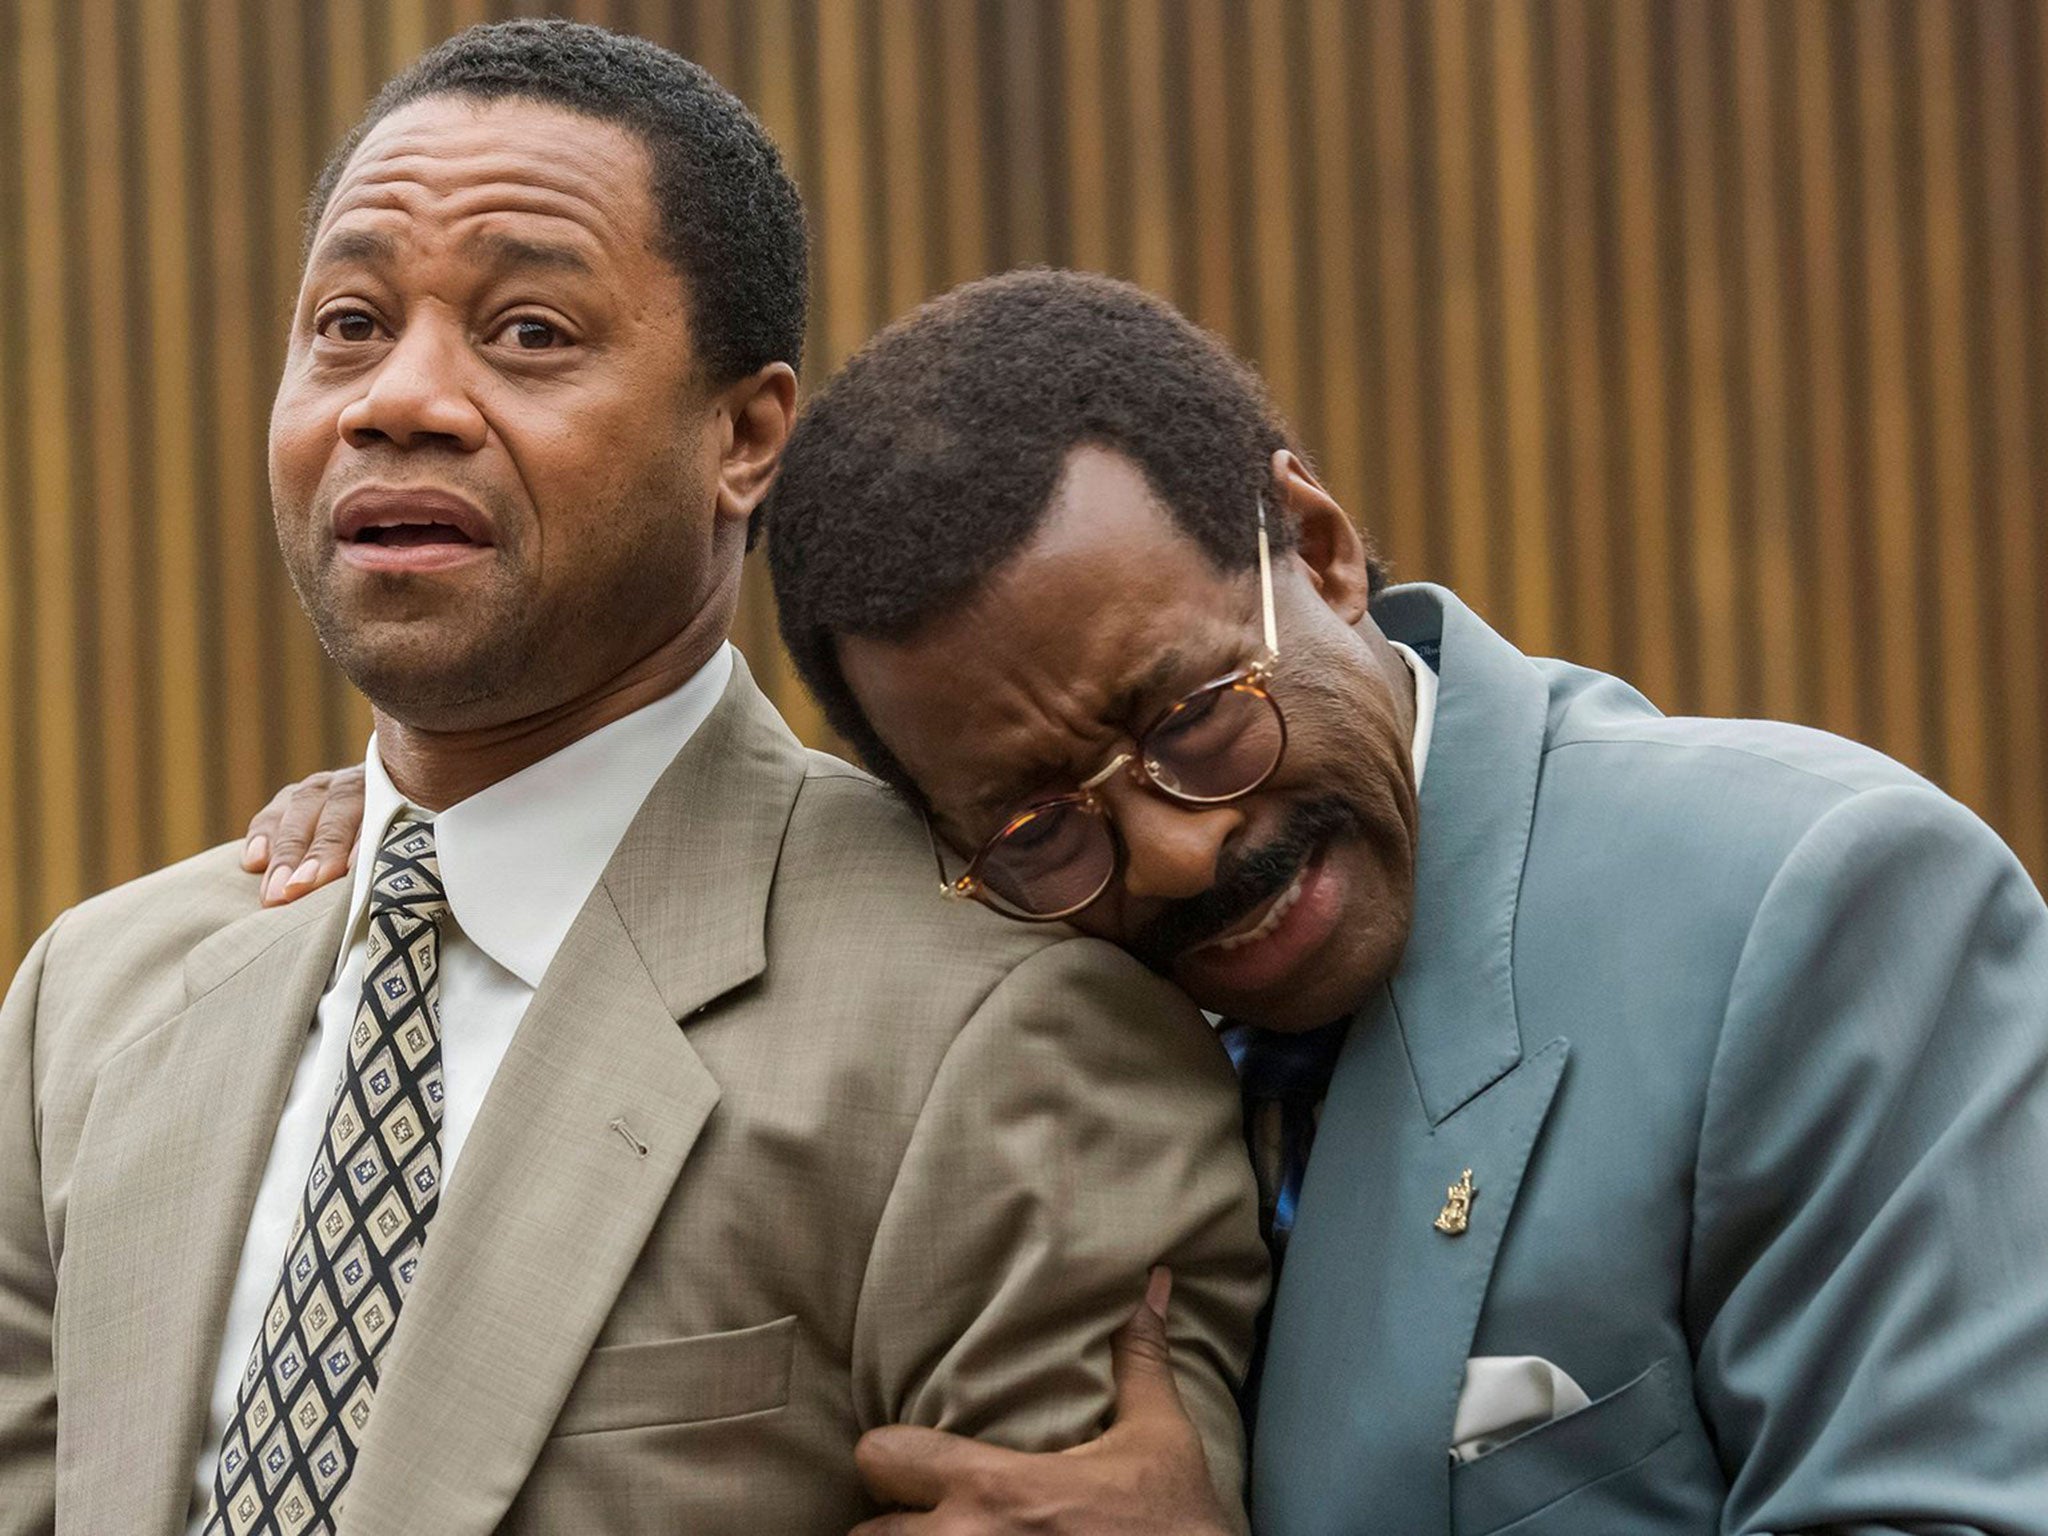 Cuba Gooding Jr (left) as OJ Simpson and Courtney B Vance as lawyer Johnnie Cochran in ‘The People v OJ Simpson’